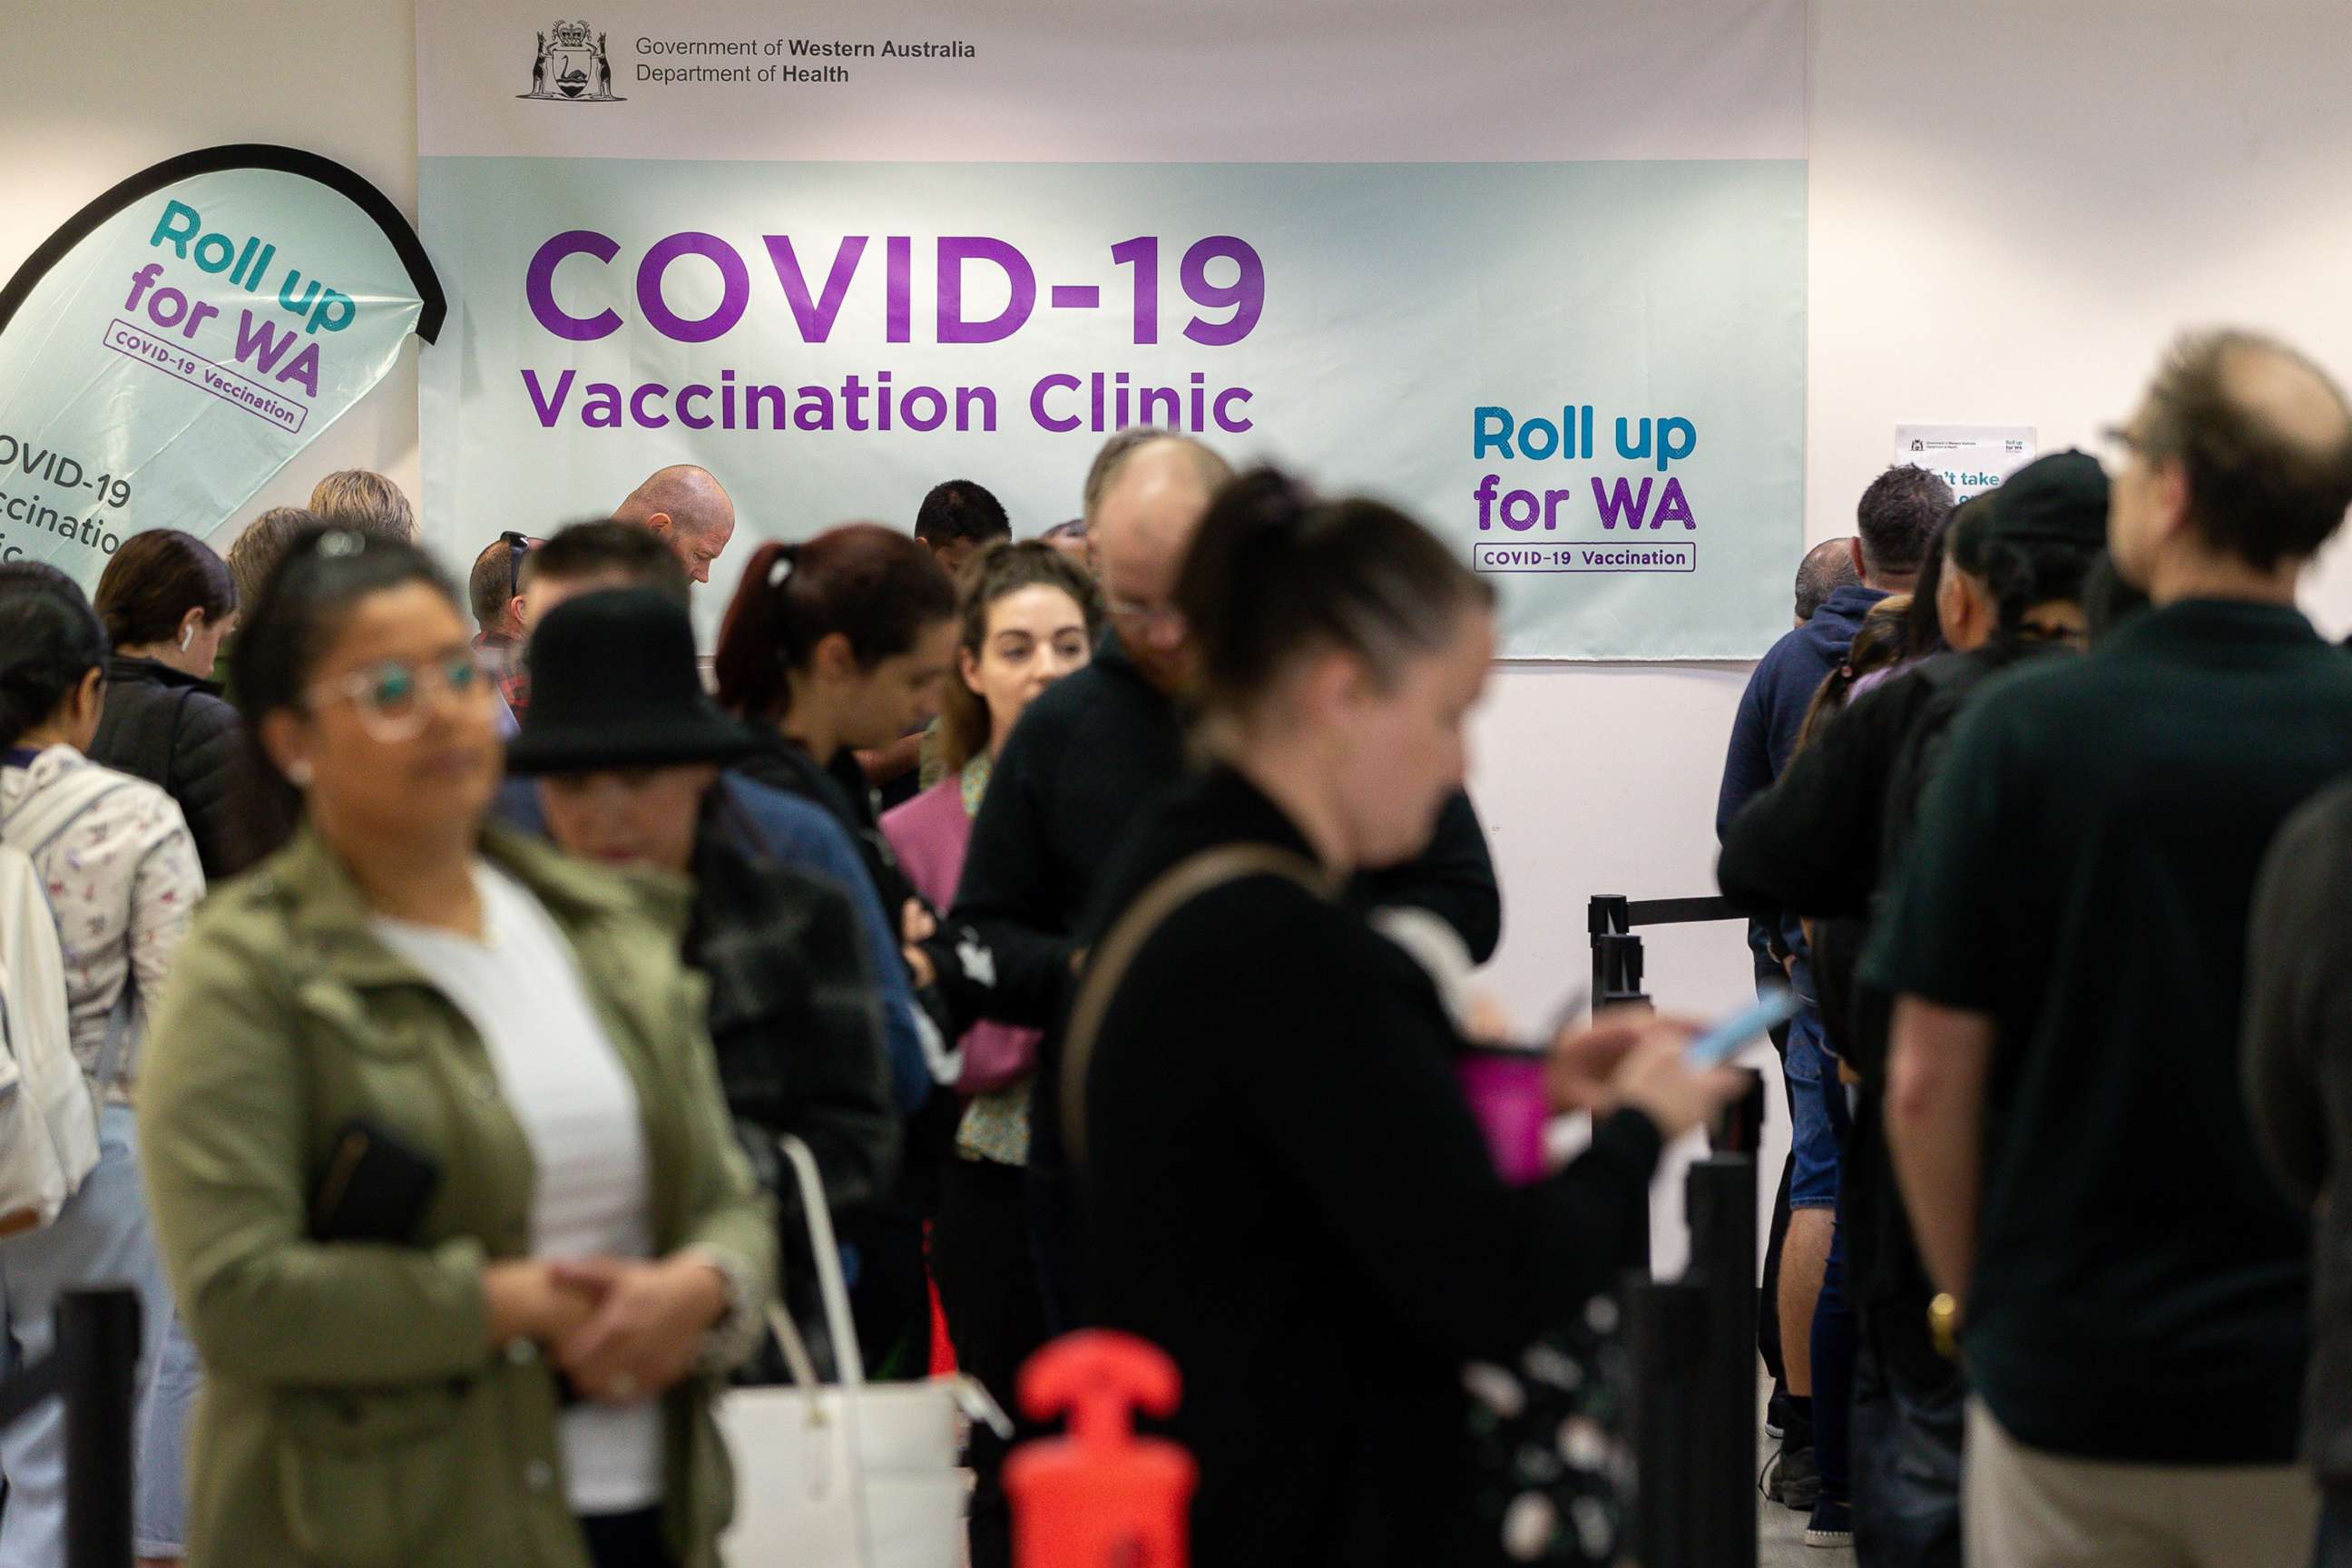 PHOTO: Members of the public wait in line at a COVID-19 mass vaccination clinic in Midland, an eastern suburb of Perth, Australia, Sept. 9, 2021.